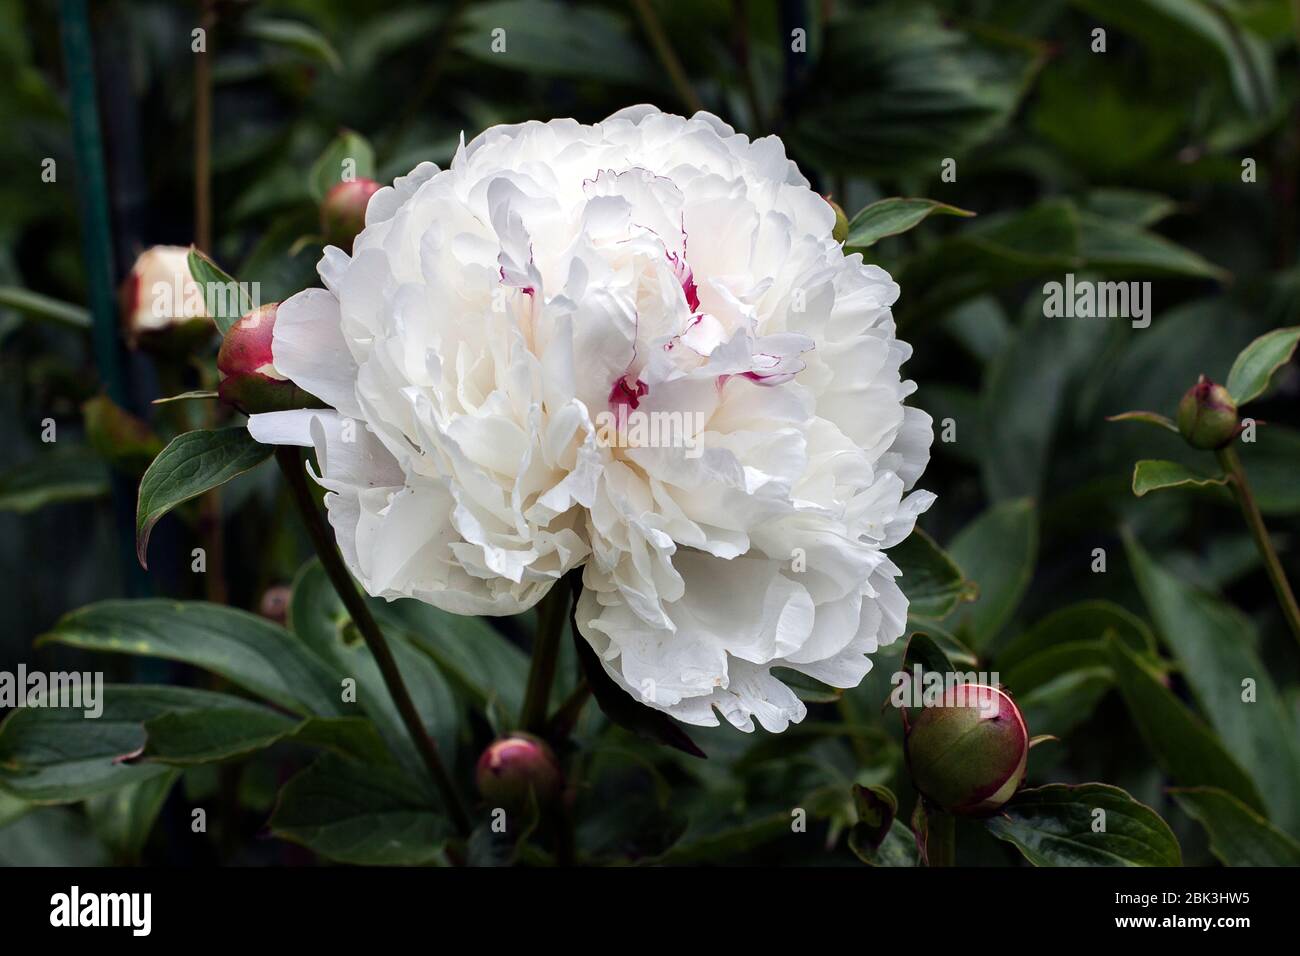 Close up image of big white peony surrounded with a number of peony buds nicely isolated against darker green floral background, beautiful contrast. Stock Photo